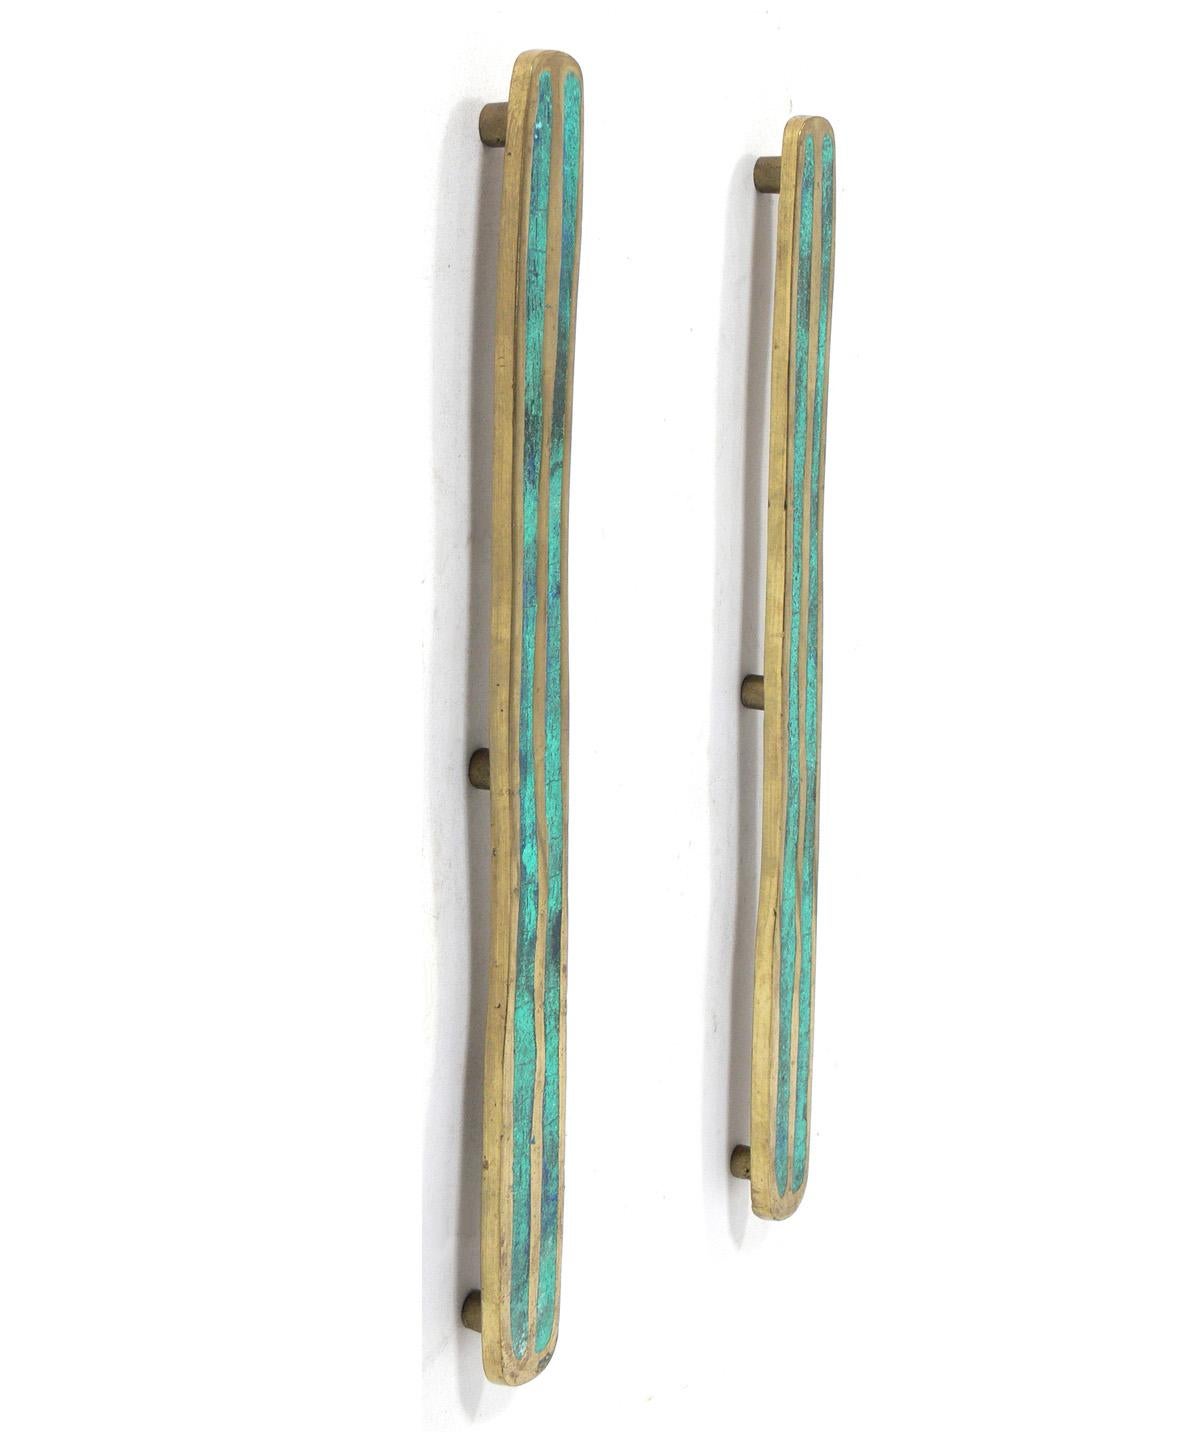 Pair of Large Scale Handles by Pepe Mendoza, Mexico, circa 1950s. These handles can be used vertically or horizontally as hardware for a special piece of furniture, or if you prefer, we can extend the depth of the attachment posts on the back so